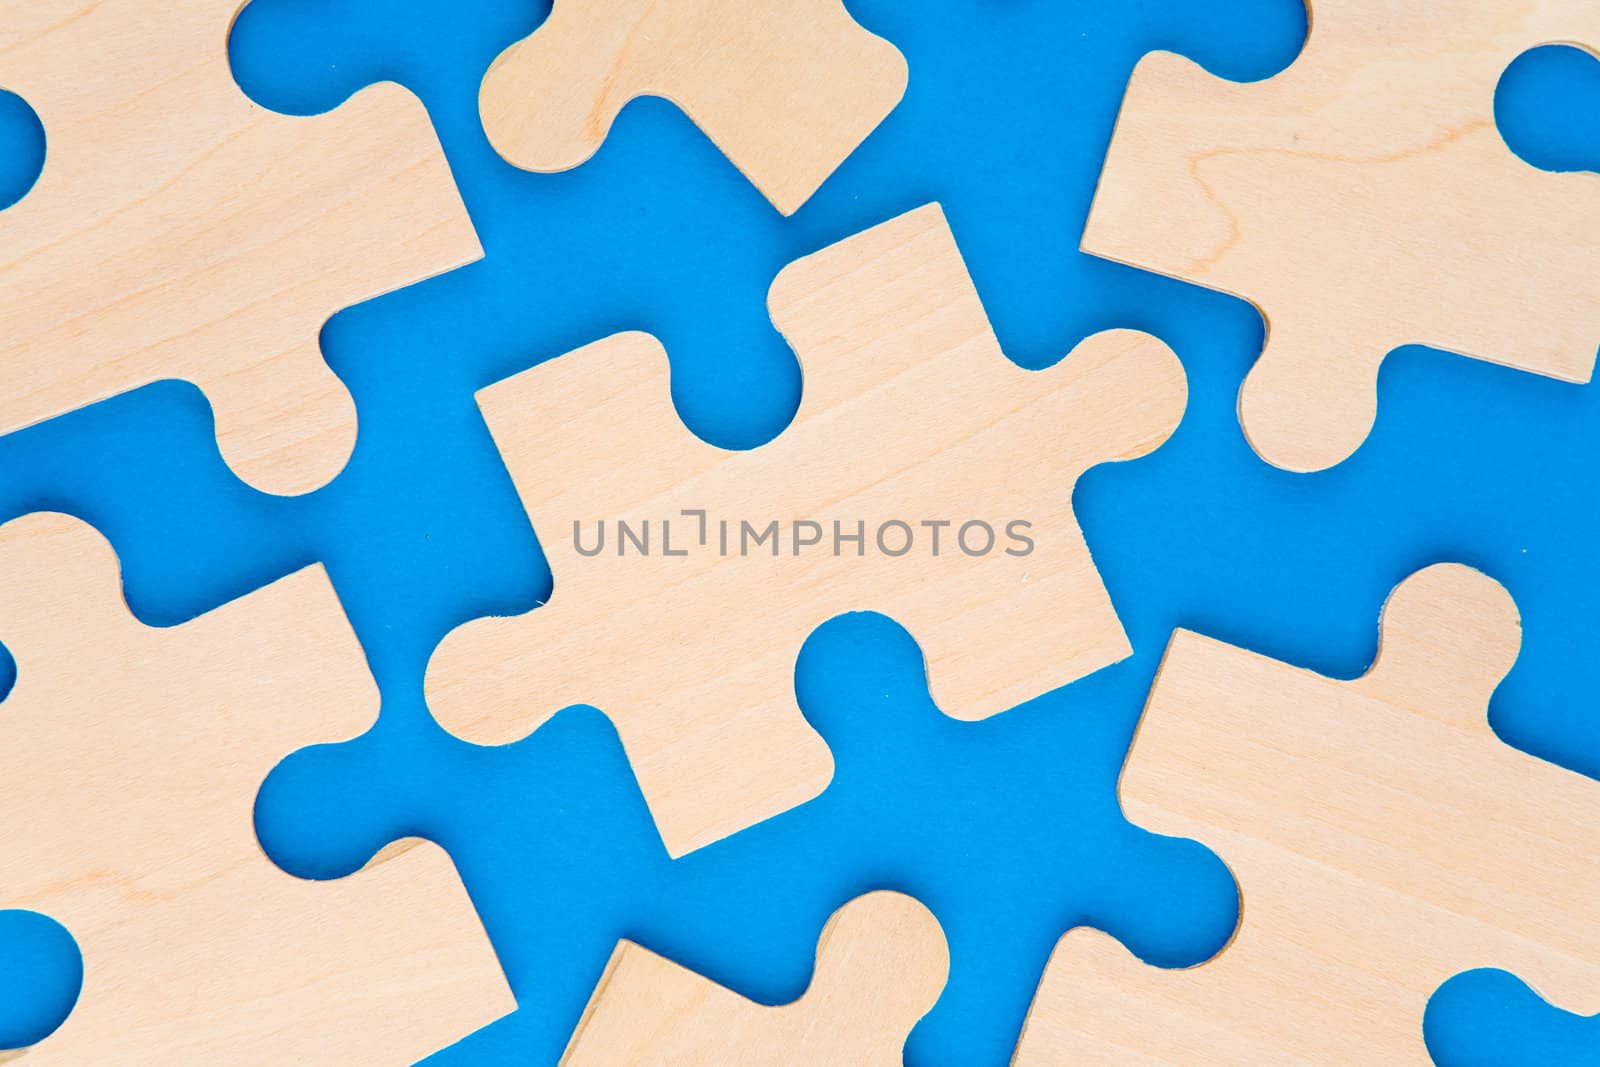 Wooden puzzle pieces on blue background